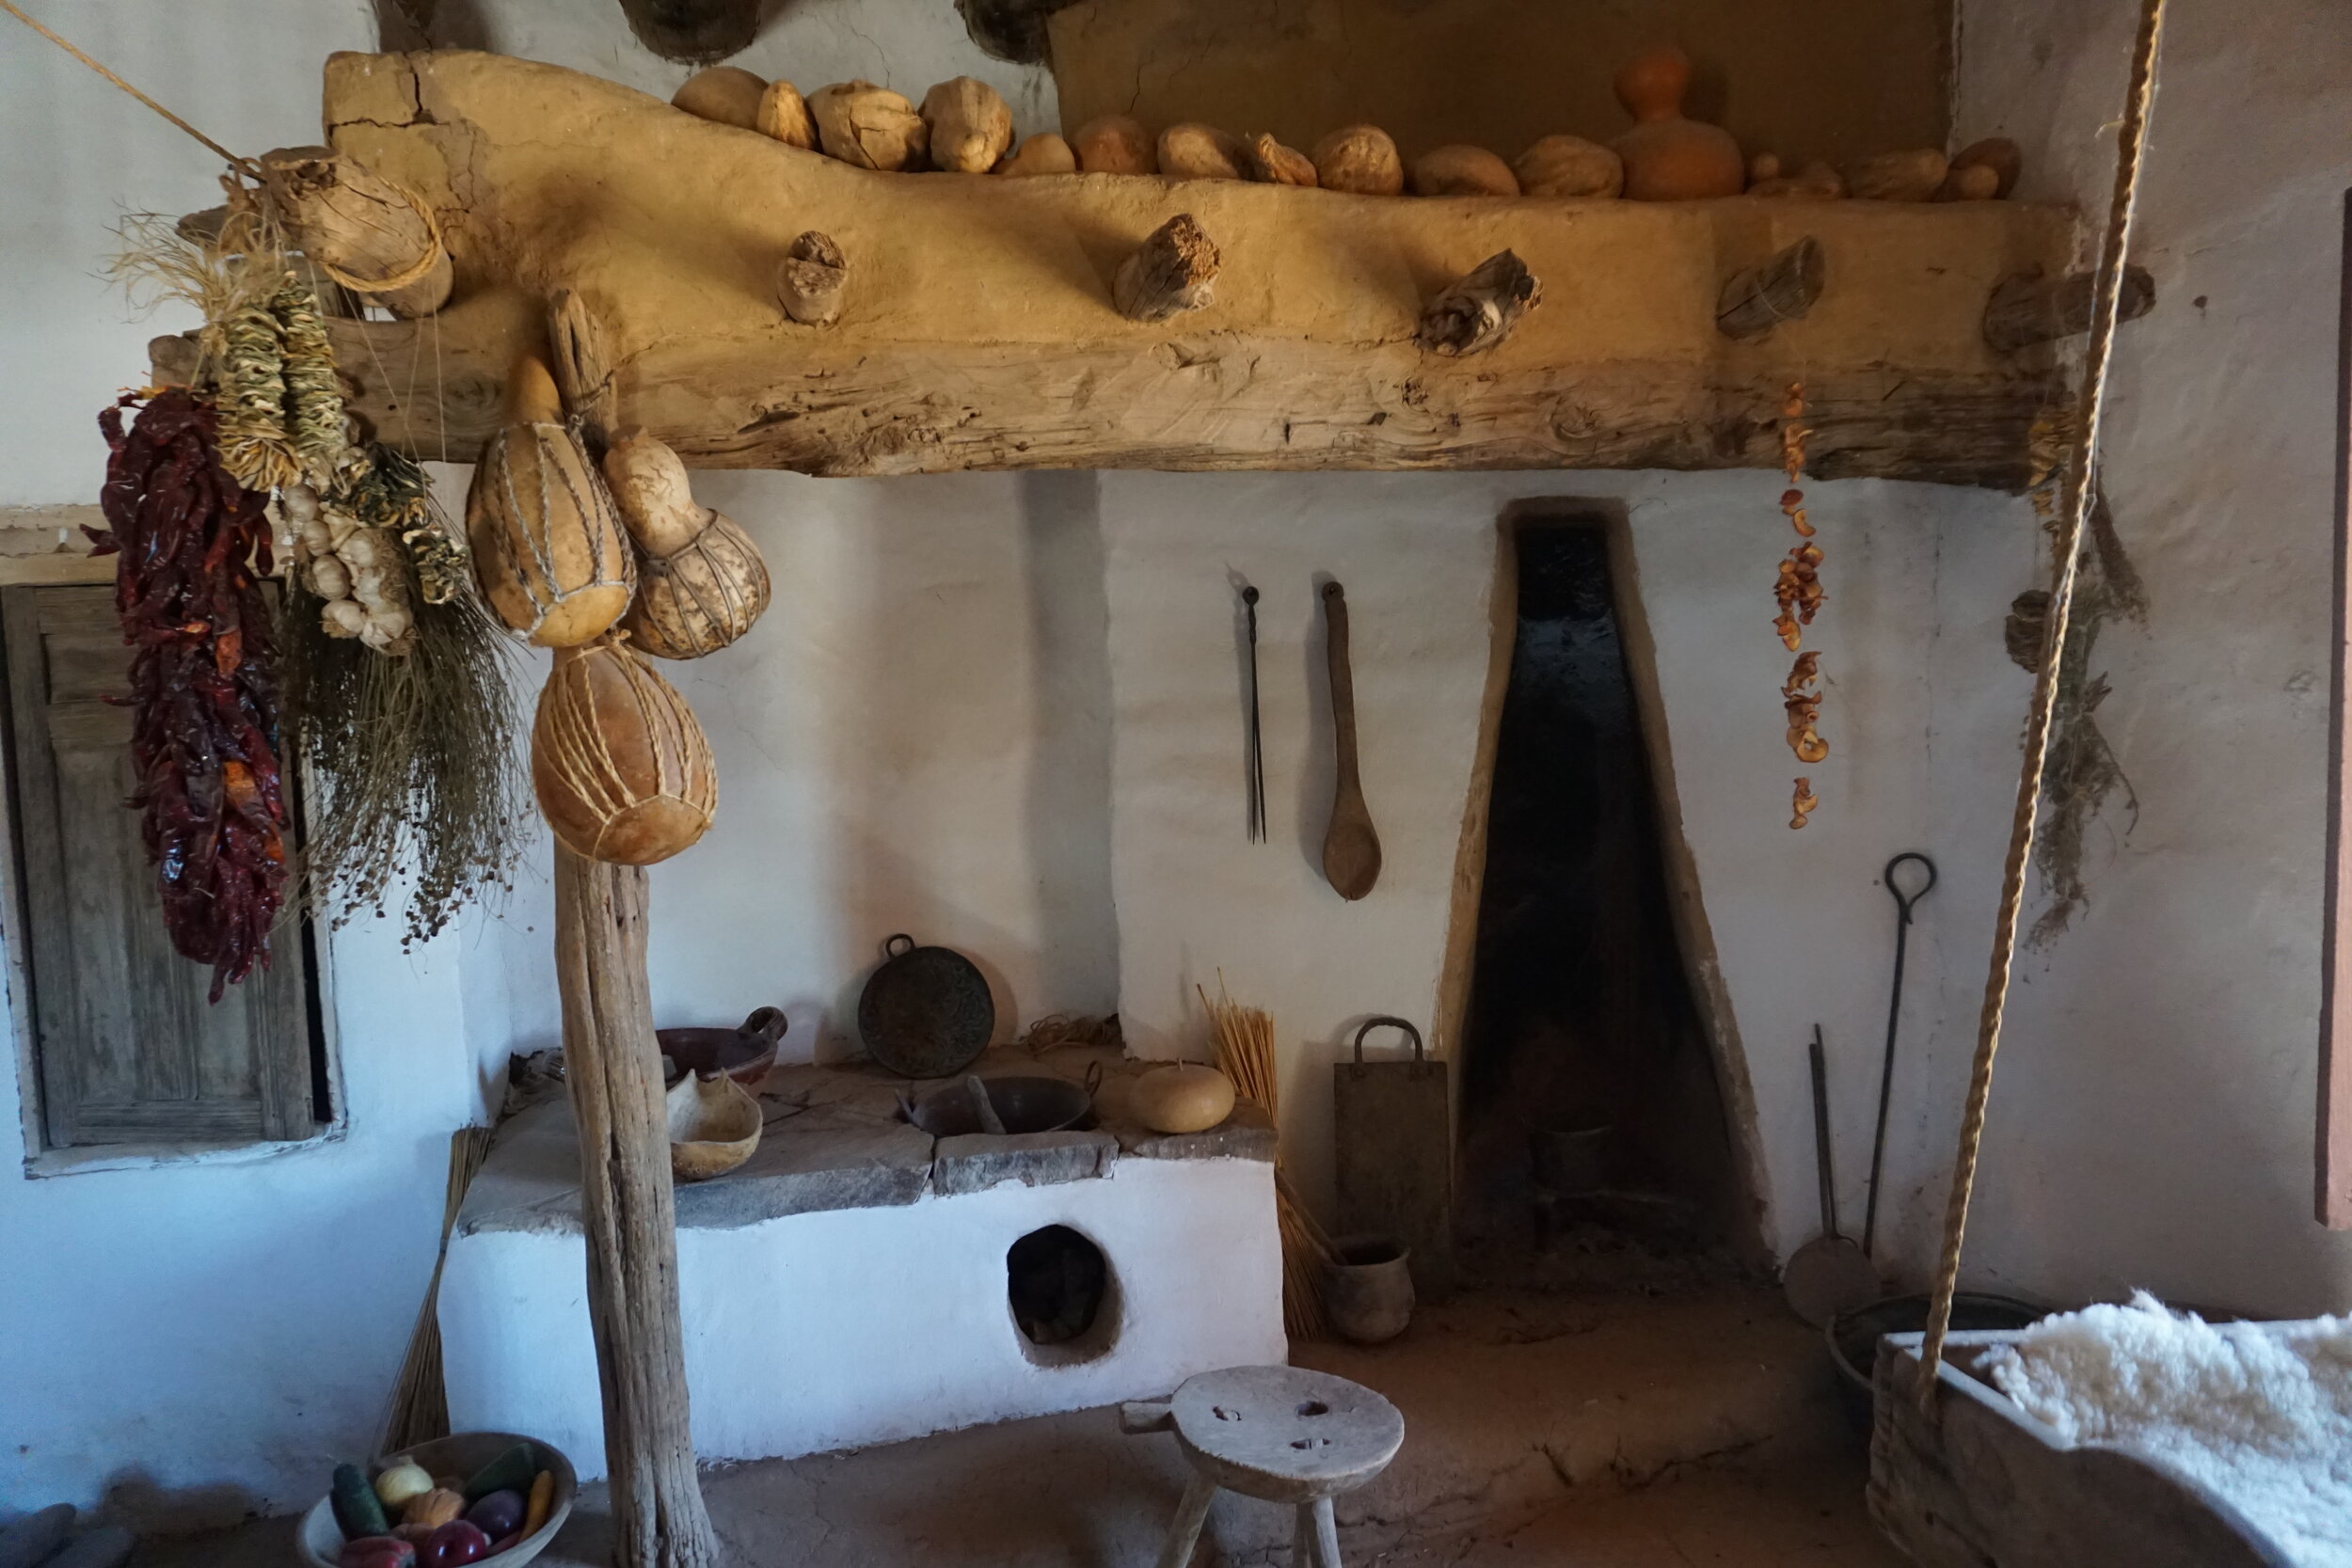 Kitchen in a historic ranch in Santa Fe, New Mexico